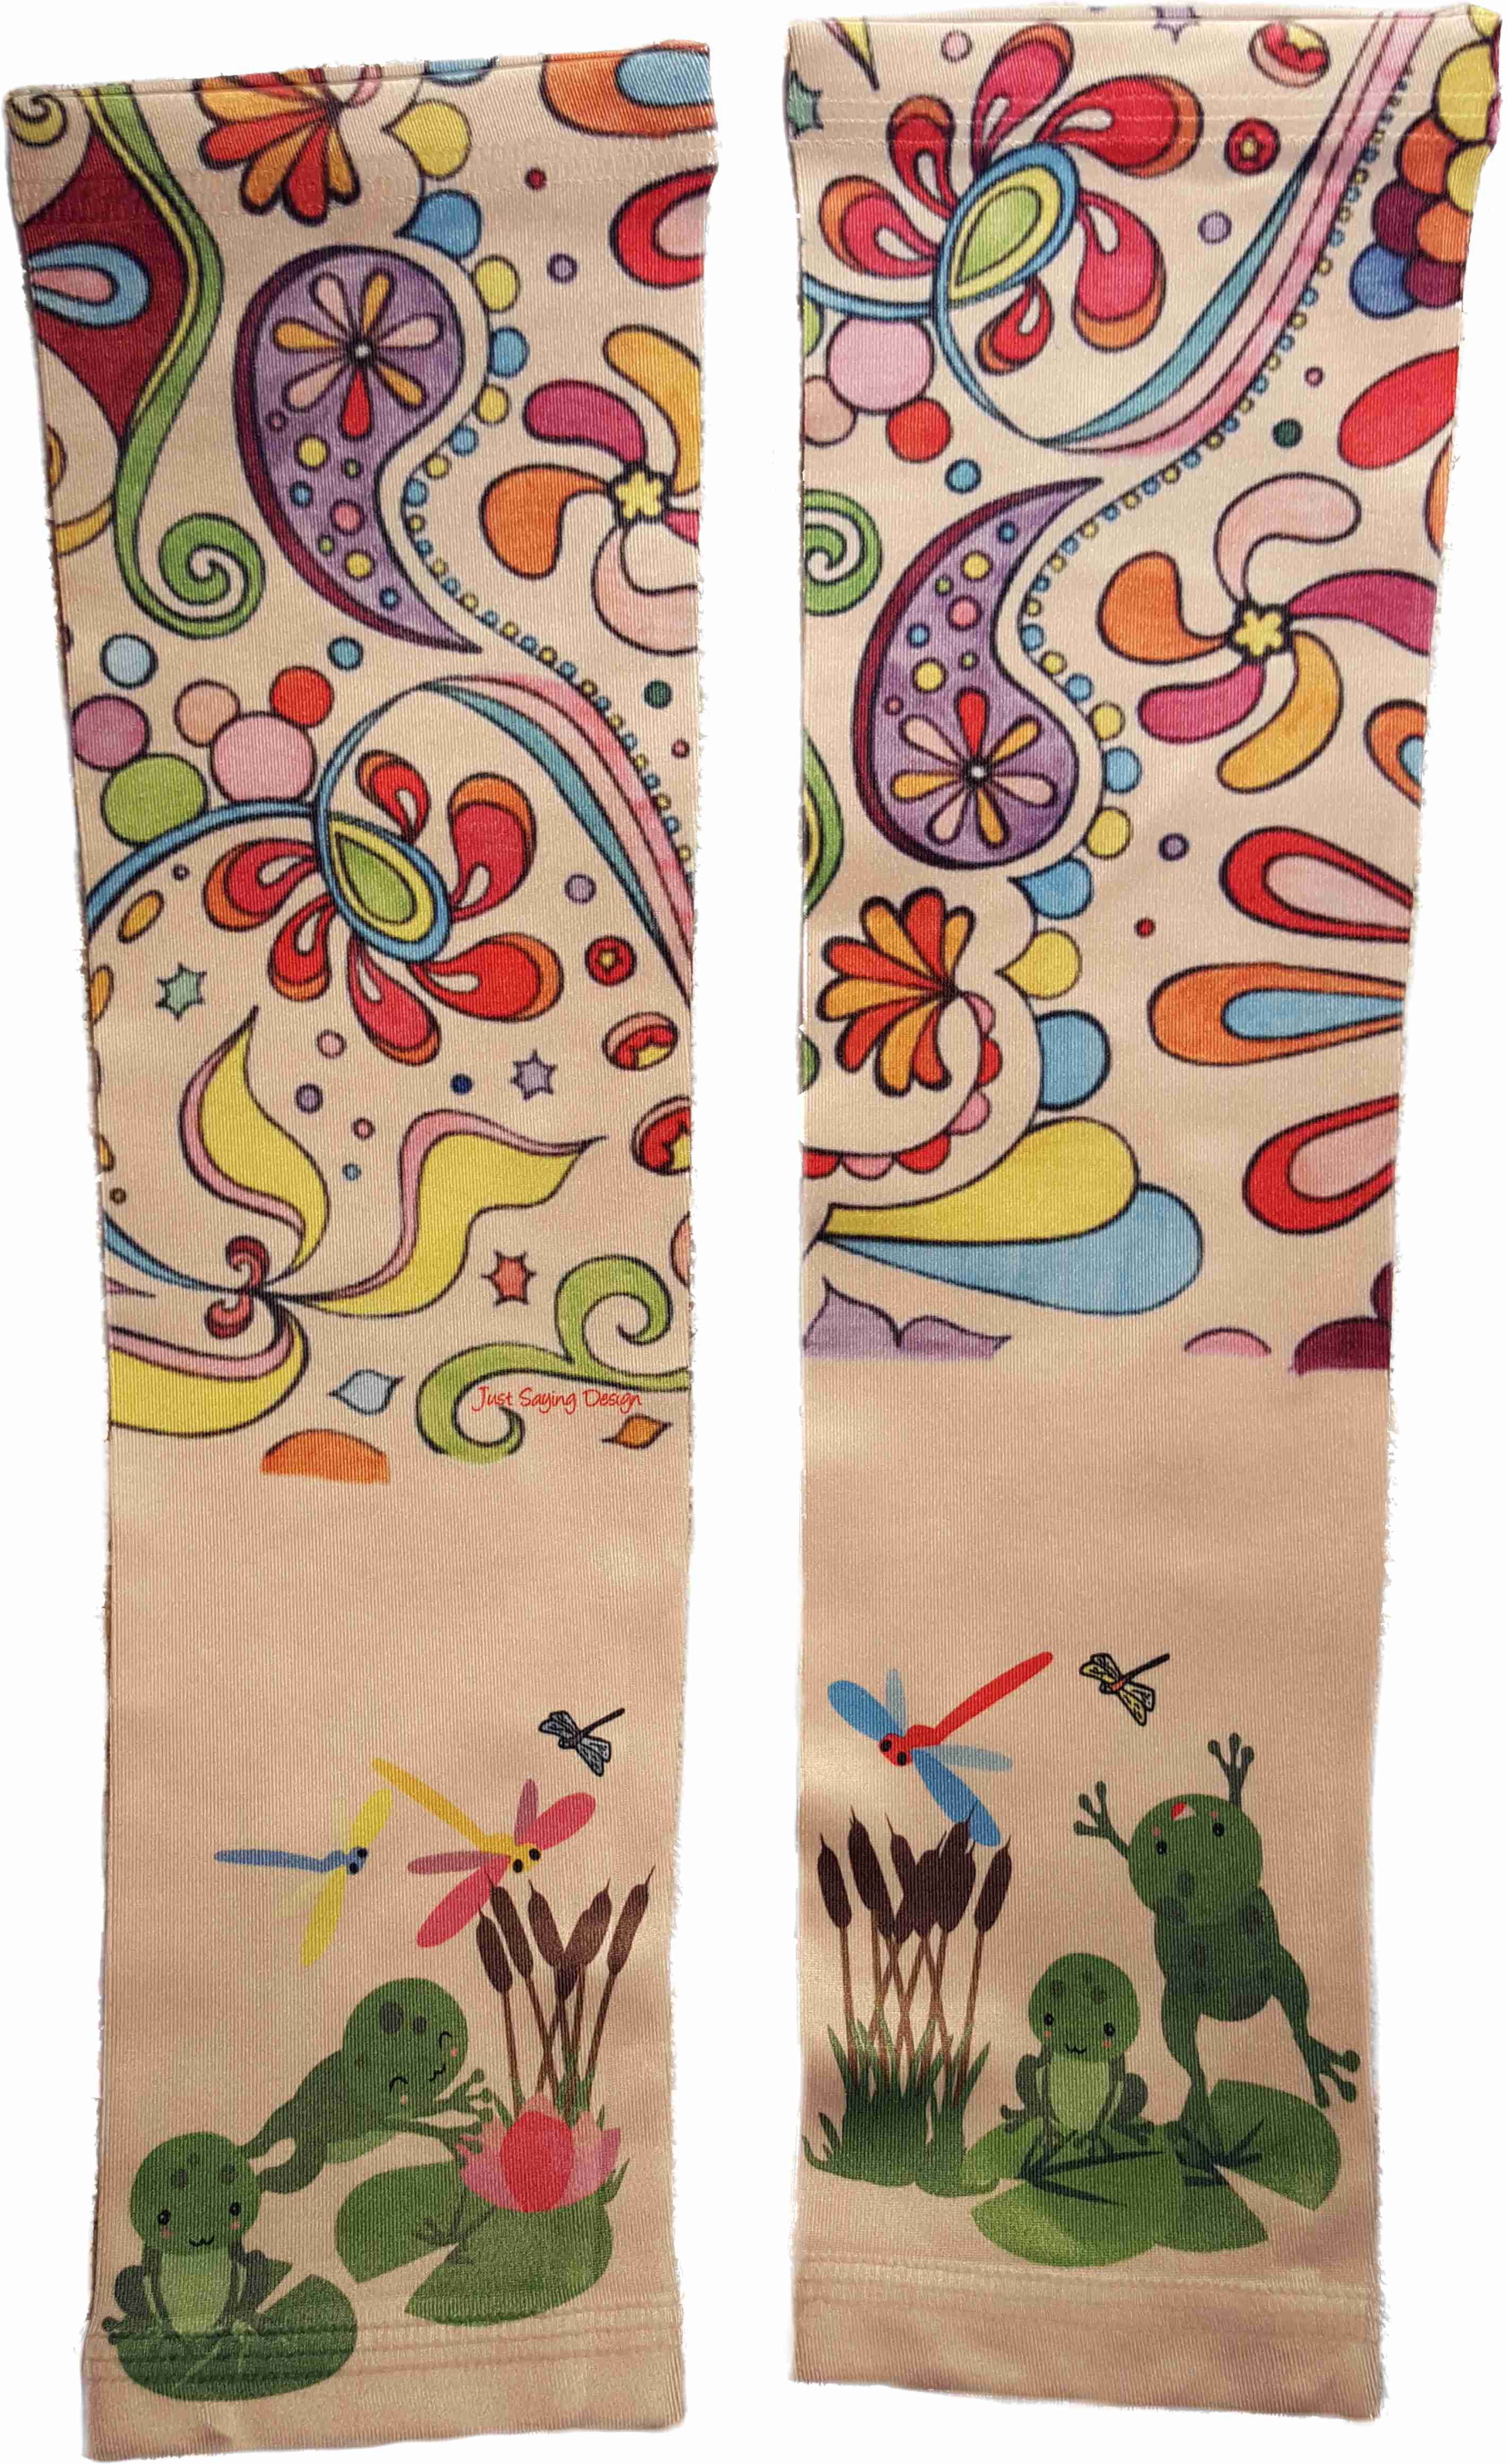 Frog, Lily Pad & Dragonflies Arm Sleeves made with sublimation printing